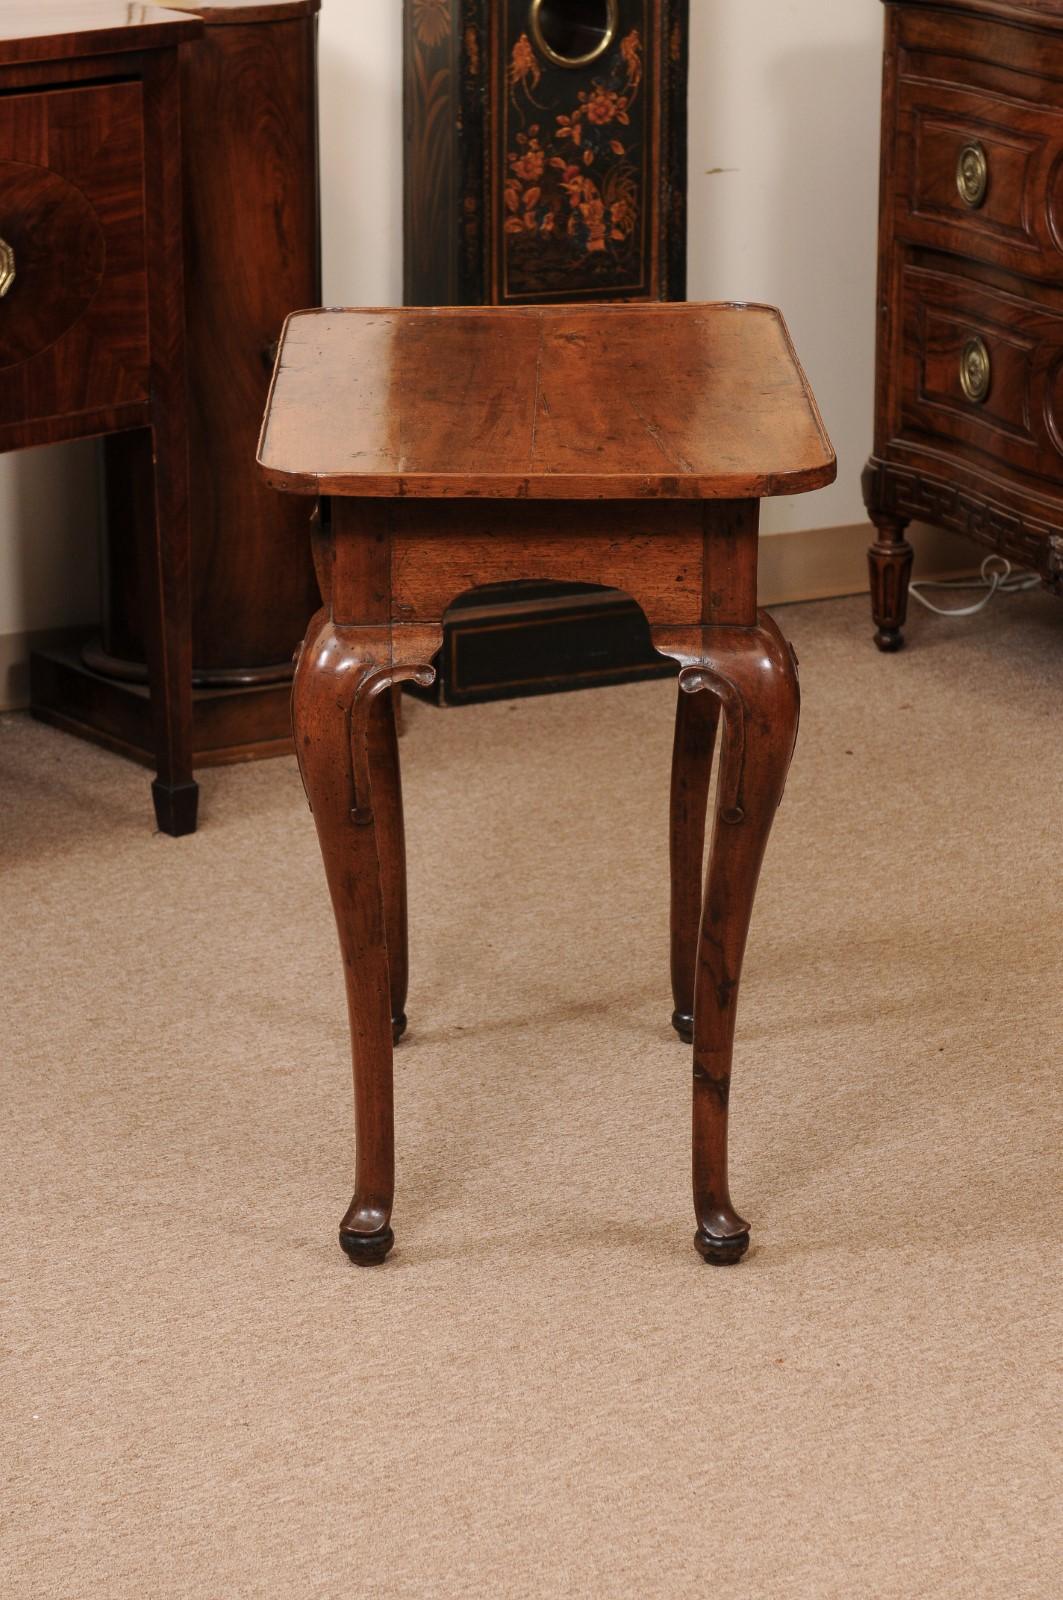 Early 18th Century Italian Walnut Side Table with Tray Top, Drawer, Cabriole Leg For Sale 6